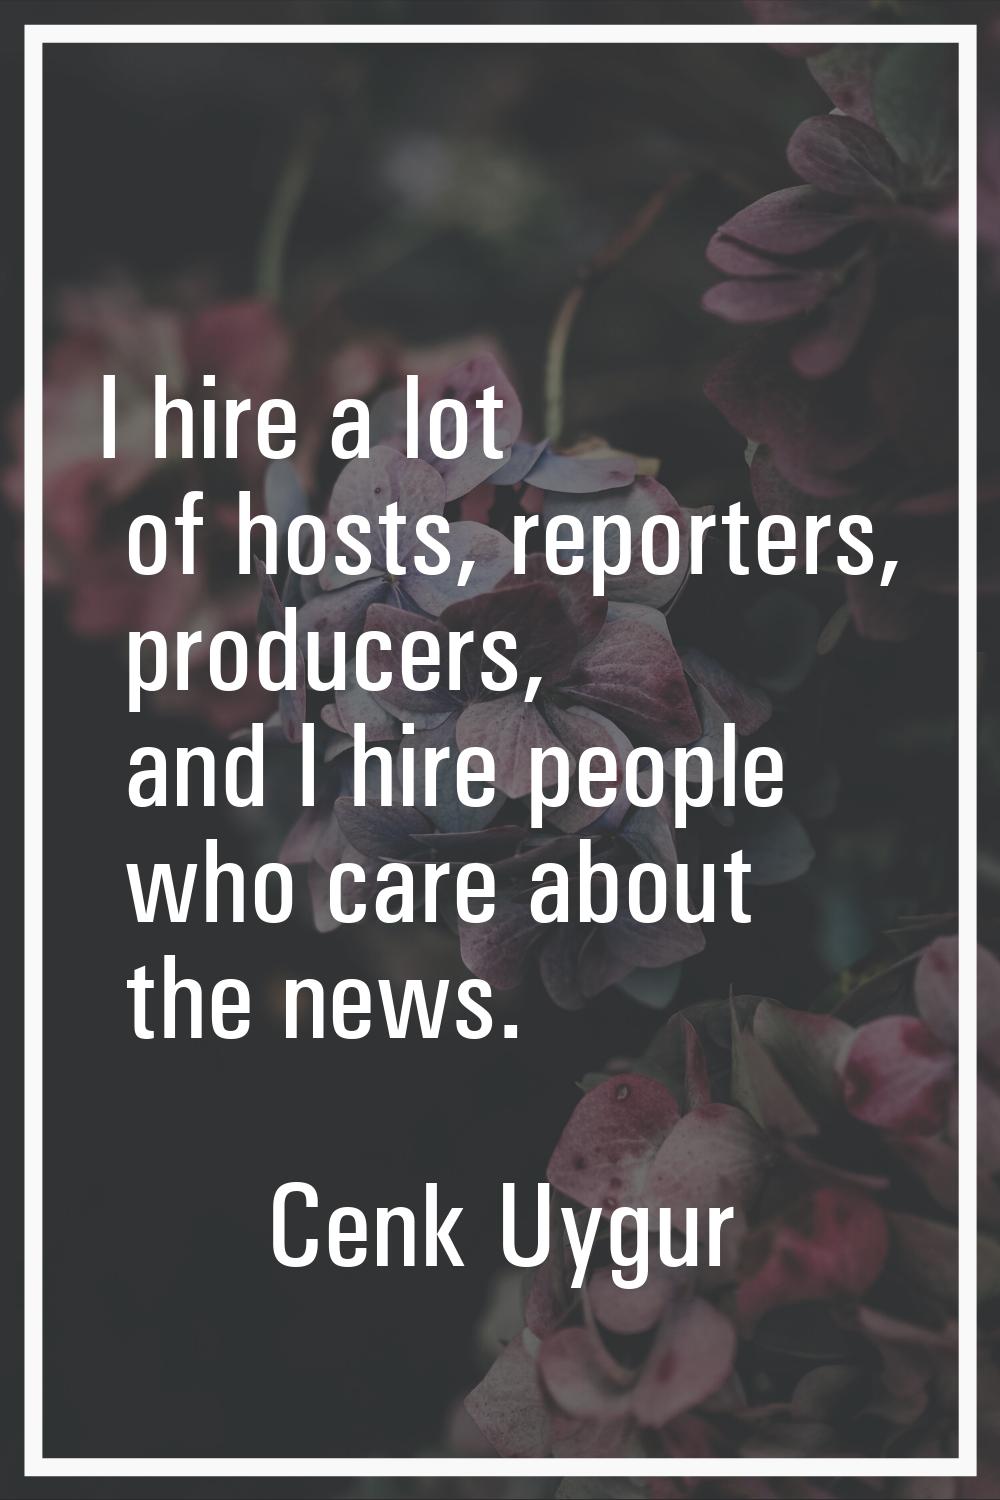 I hire a lot of hosts, reporters, producers, and I hire people who care about the news.